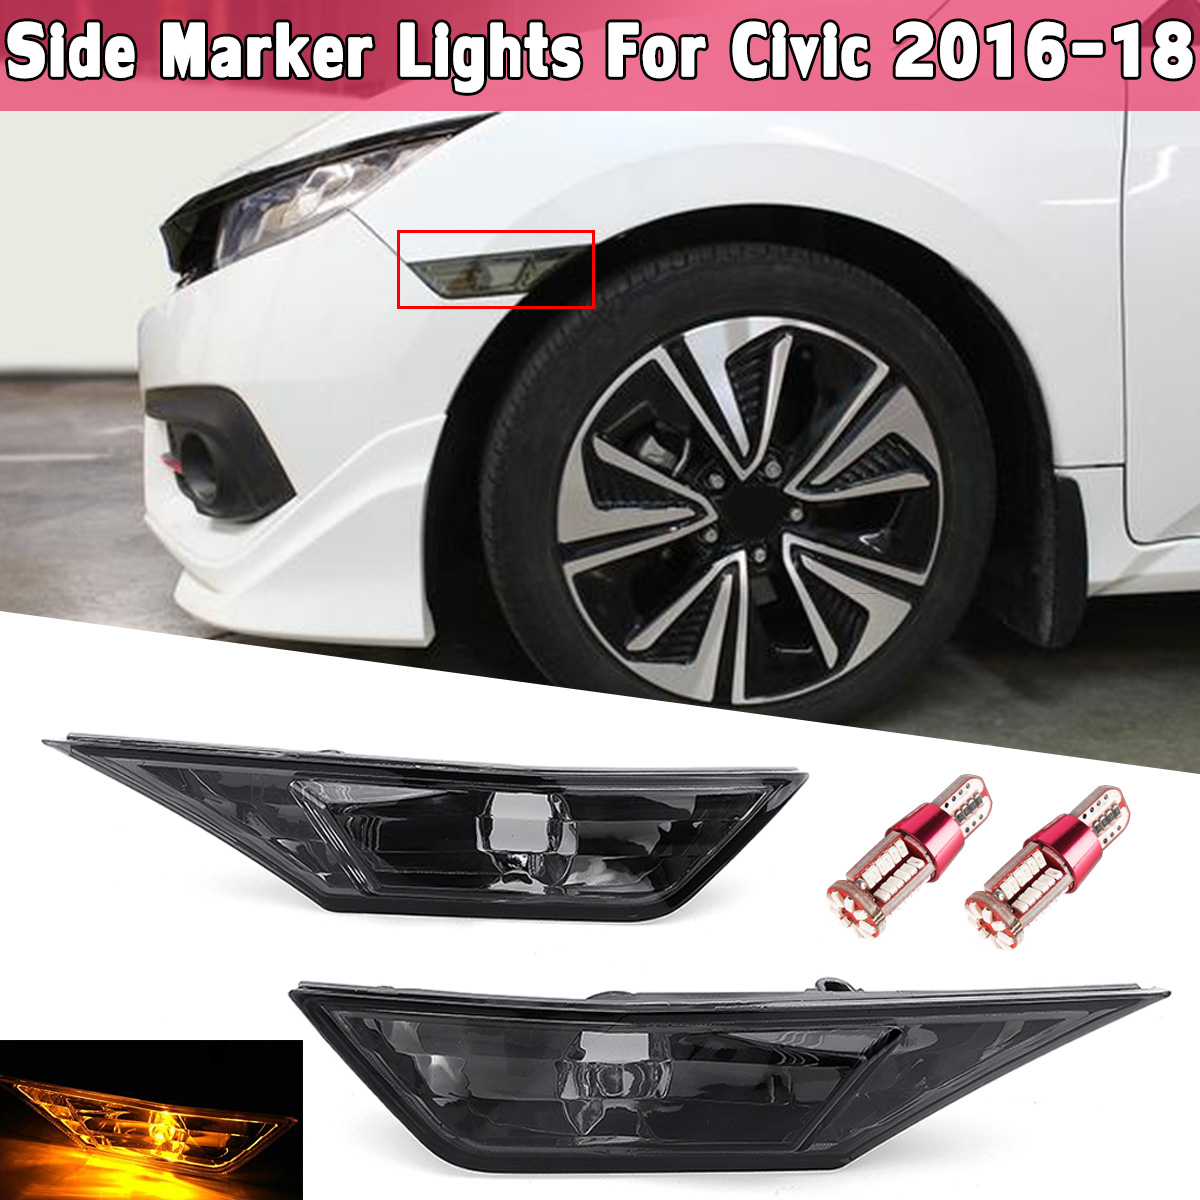 Smoke Front LED Side Marker Lights Turn Signal Lampshade For 2016-2018 Civic